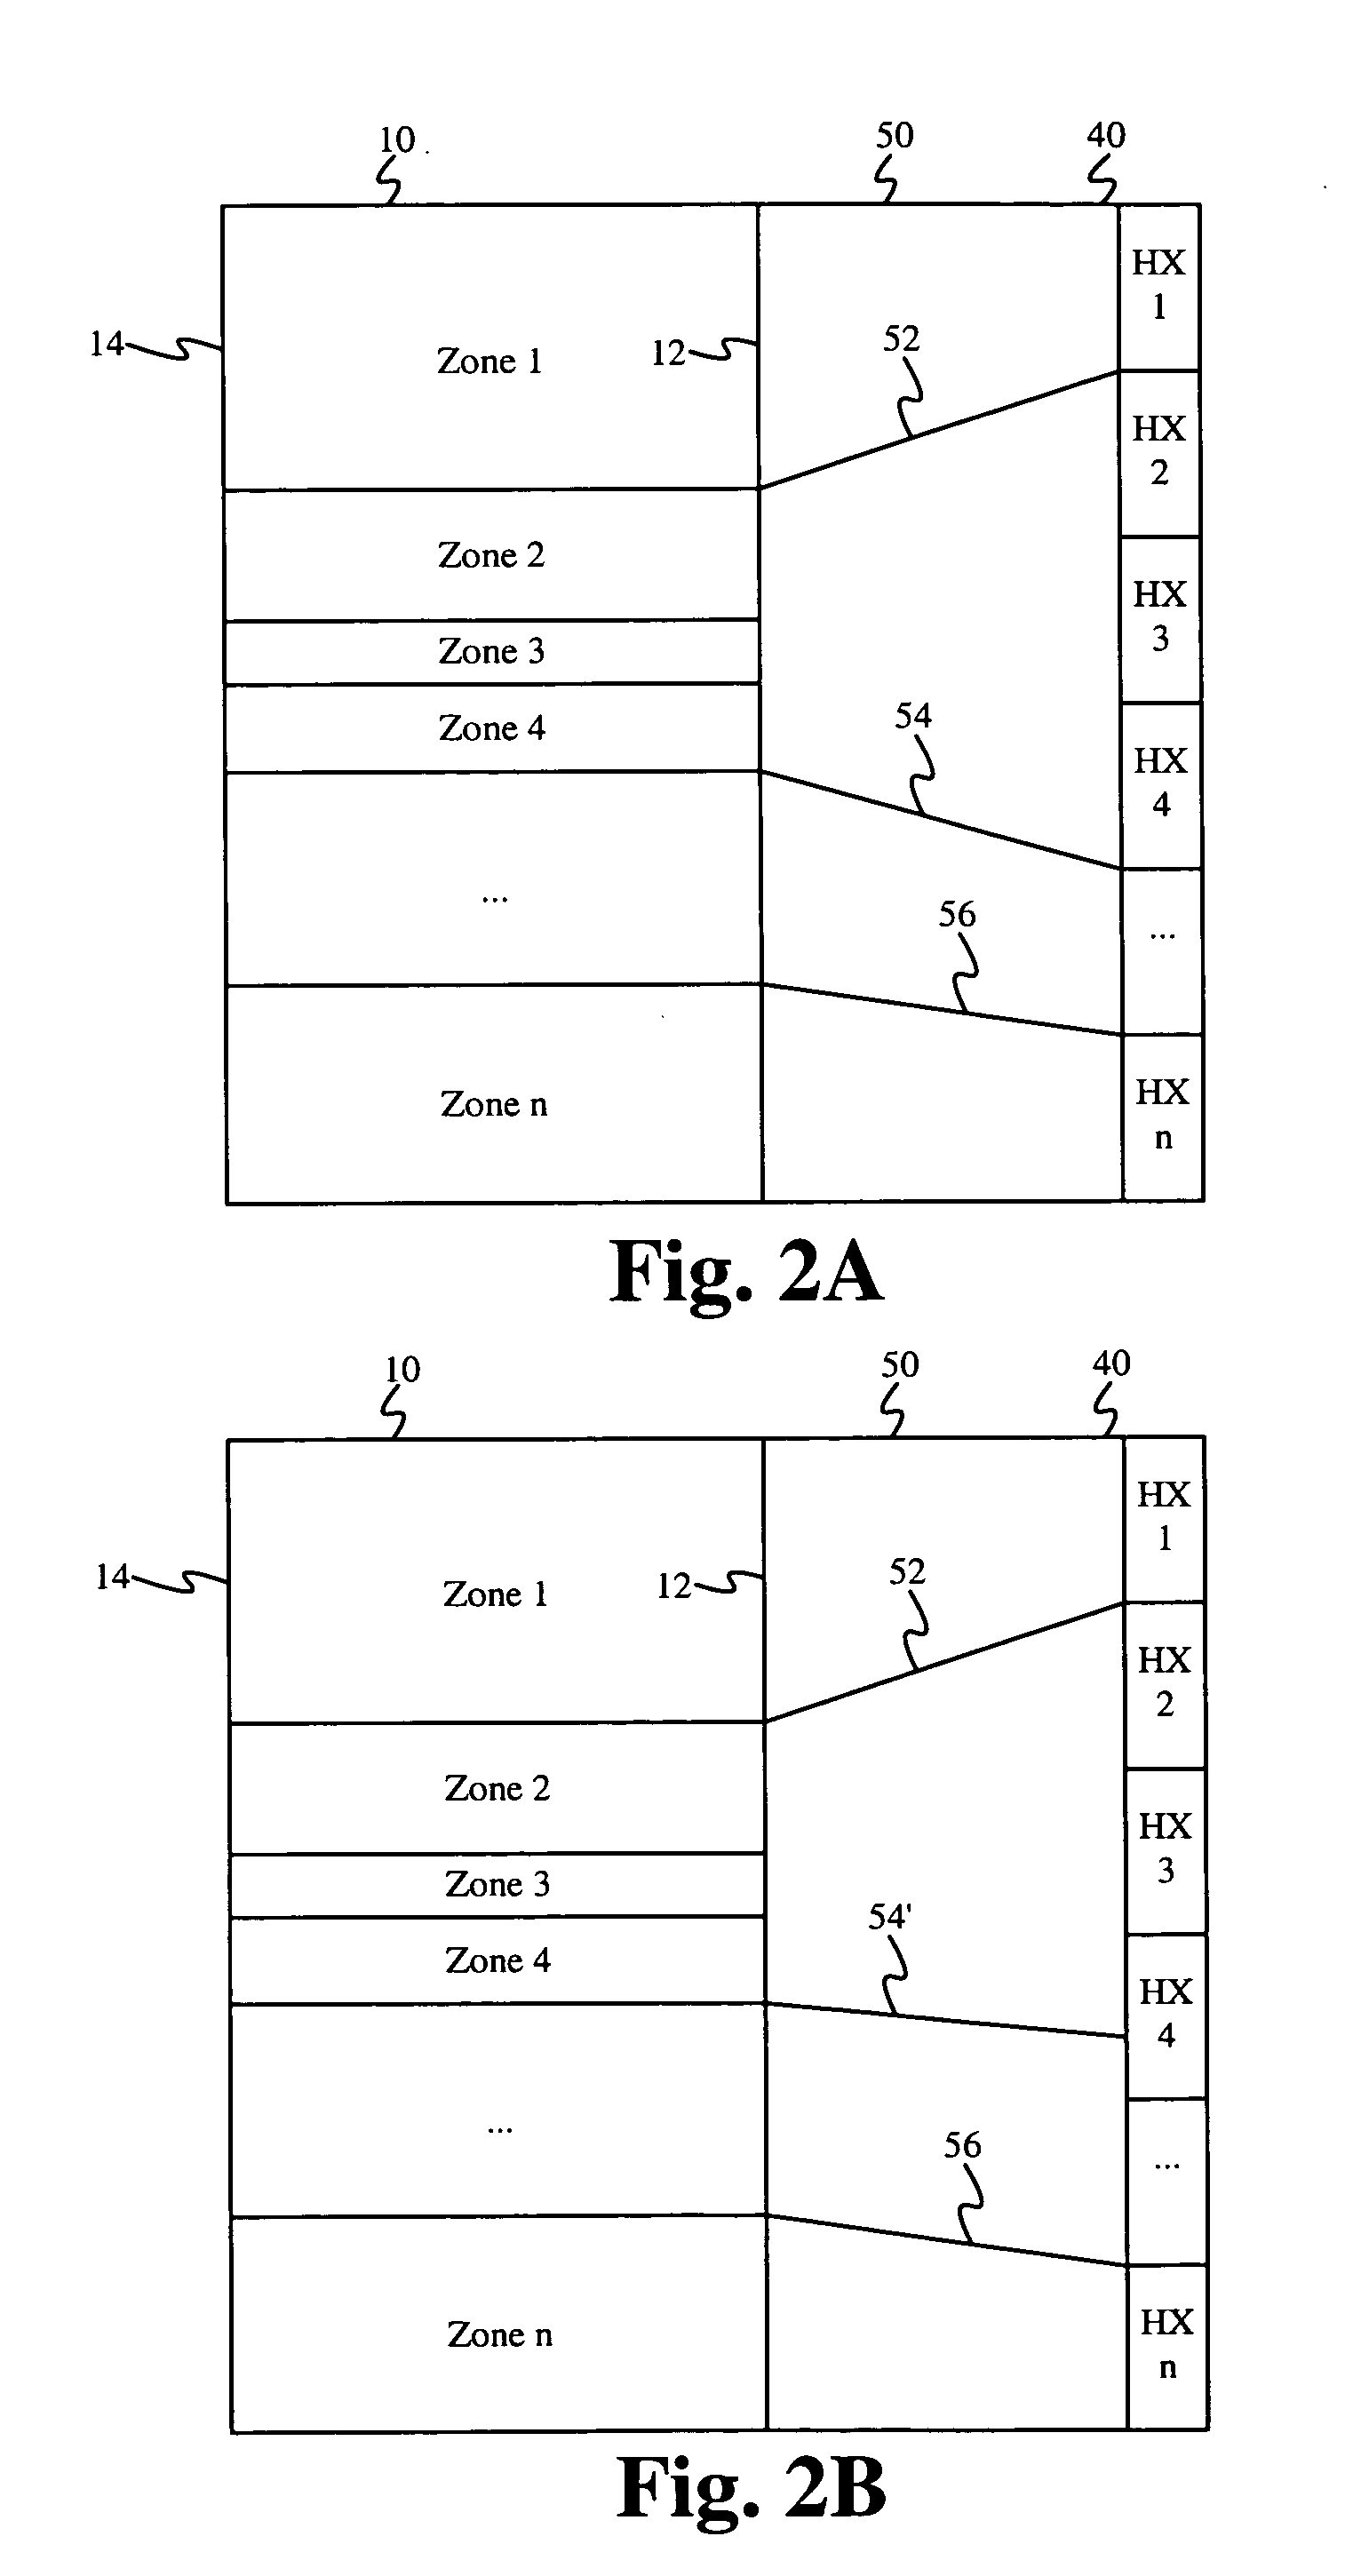 Method and apparatus for providing supplemental cooling to server racks